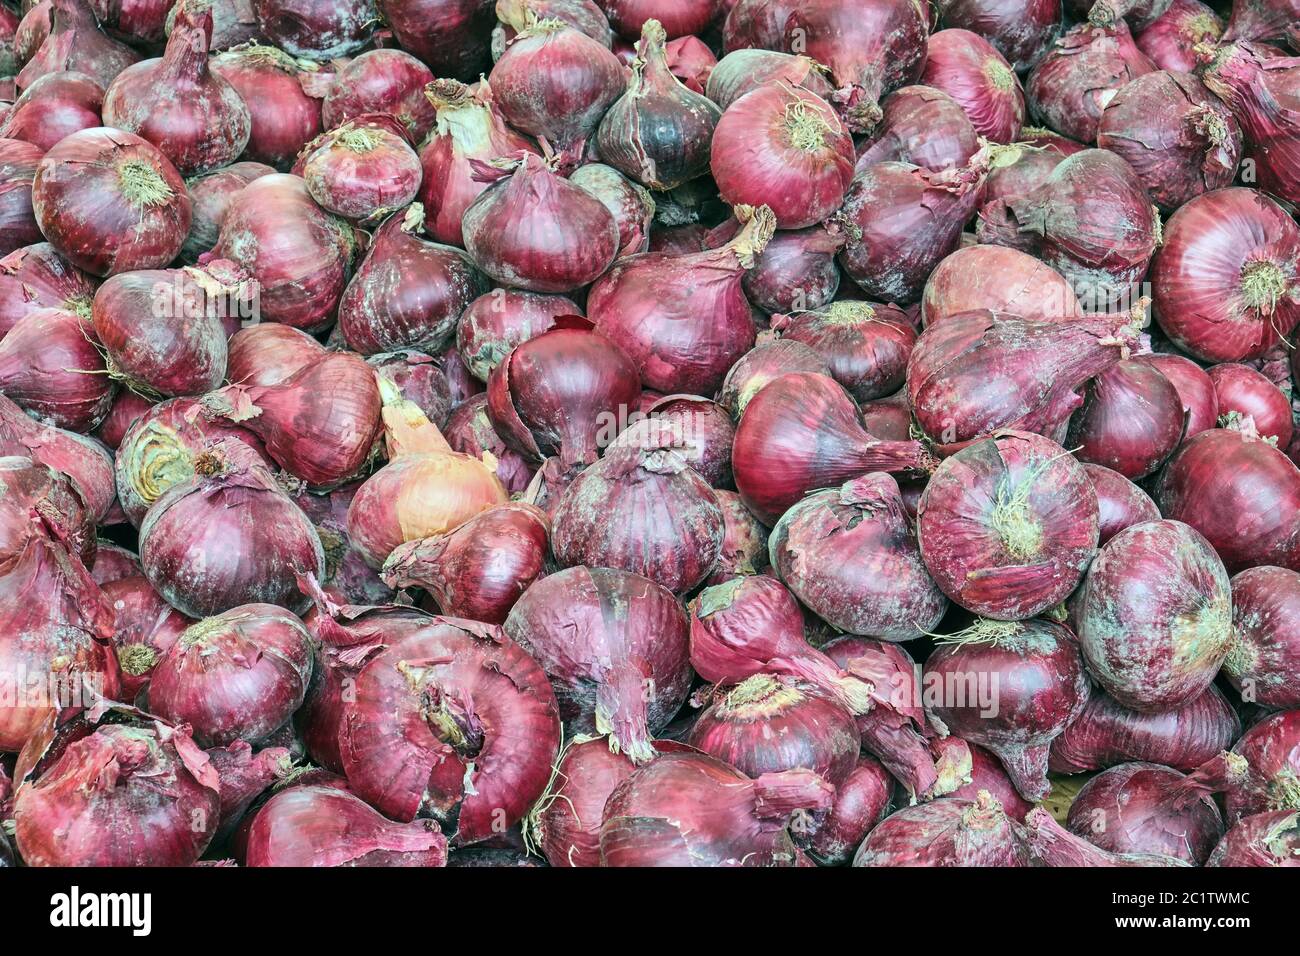 Red onions for sale at a market Stock Photo